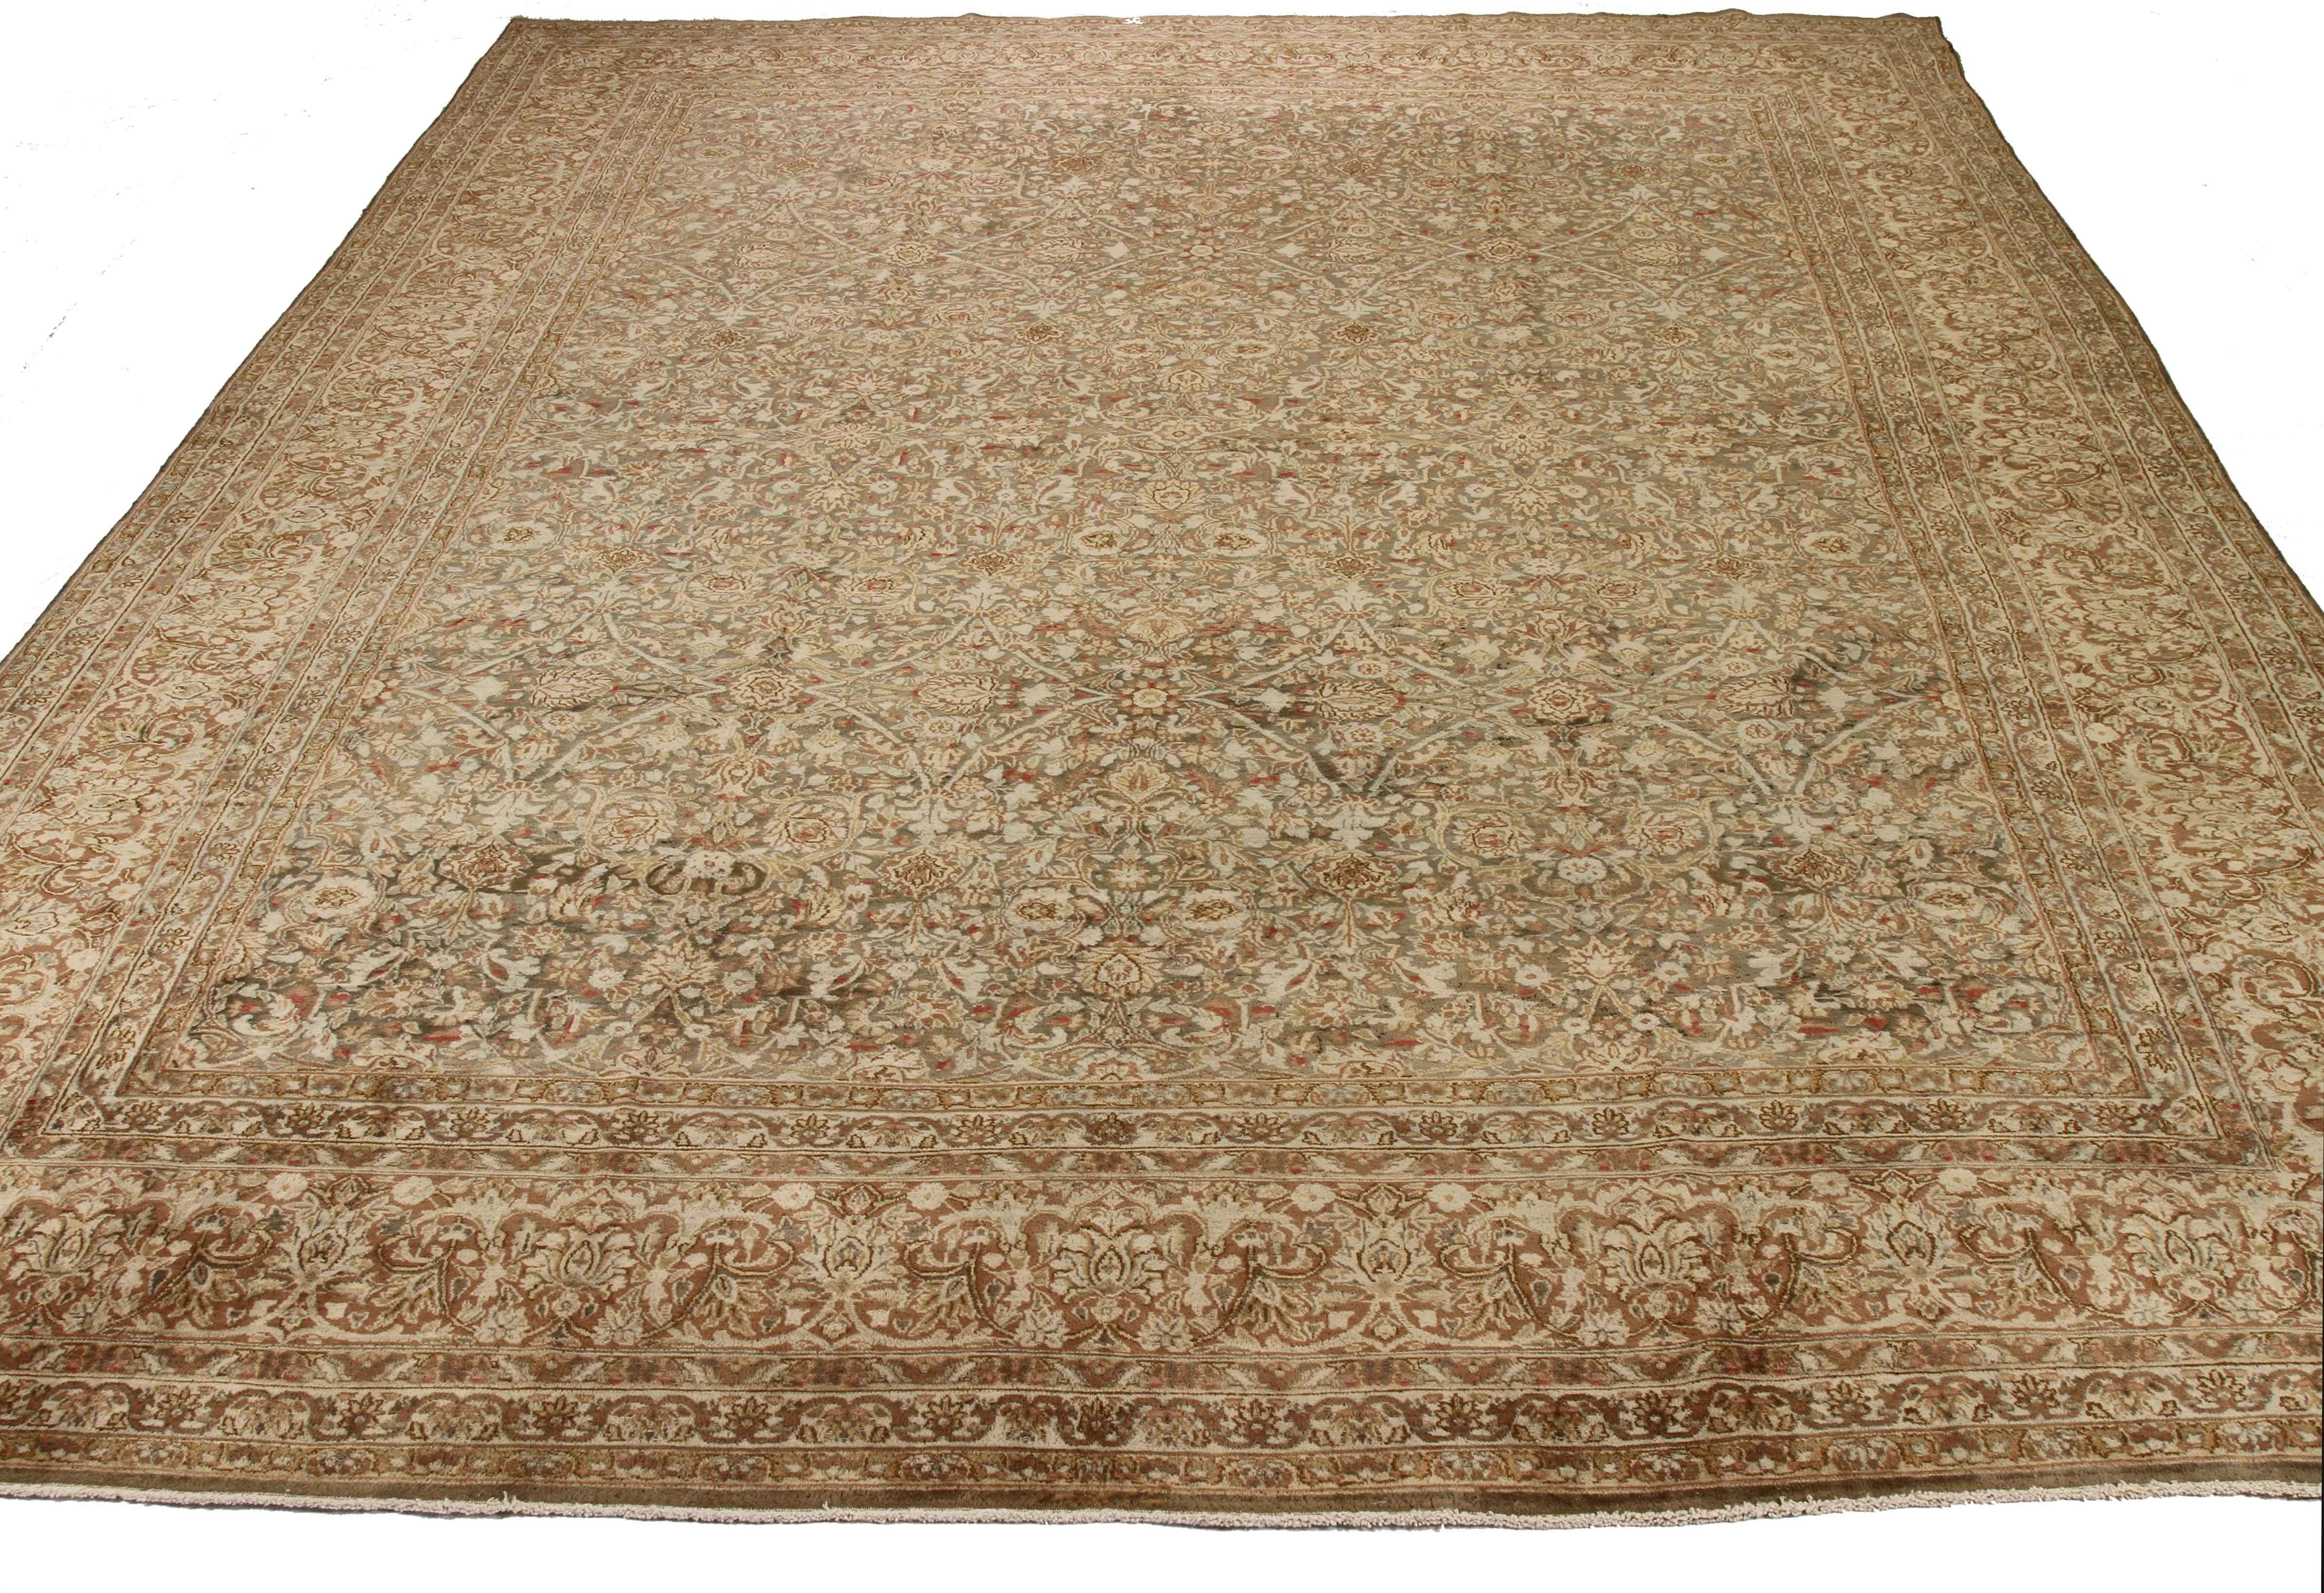 Hand-Knotted Antique Persian Kerman Rug with Rustic Flower Field Design, circa 1930s For Sale